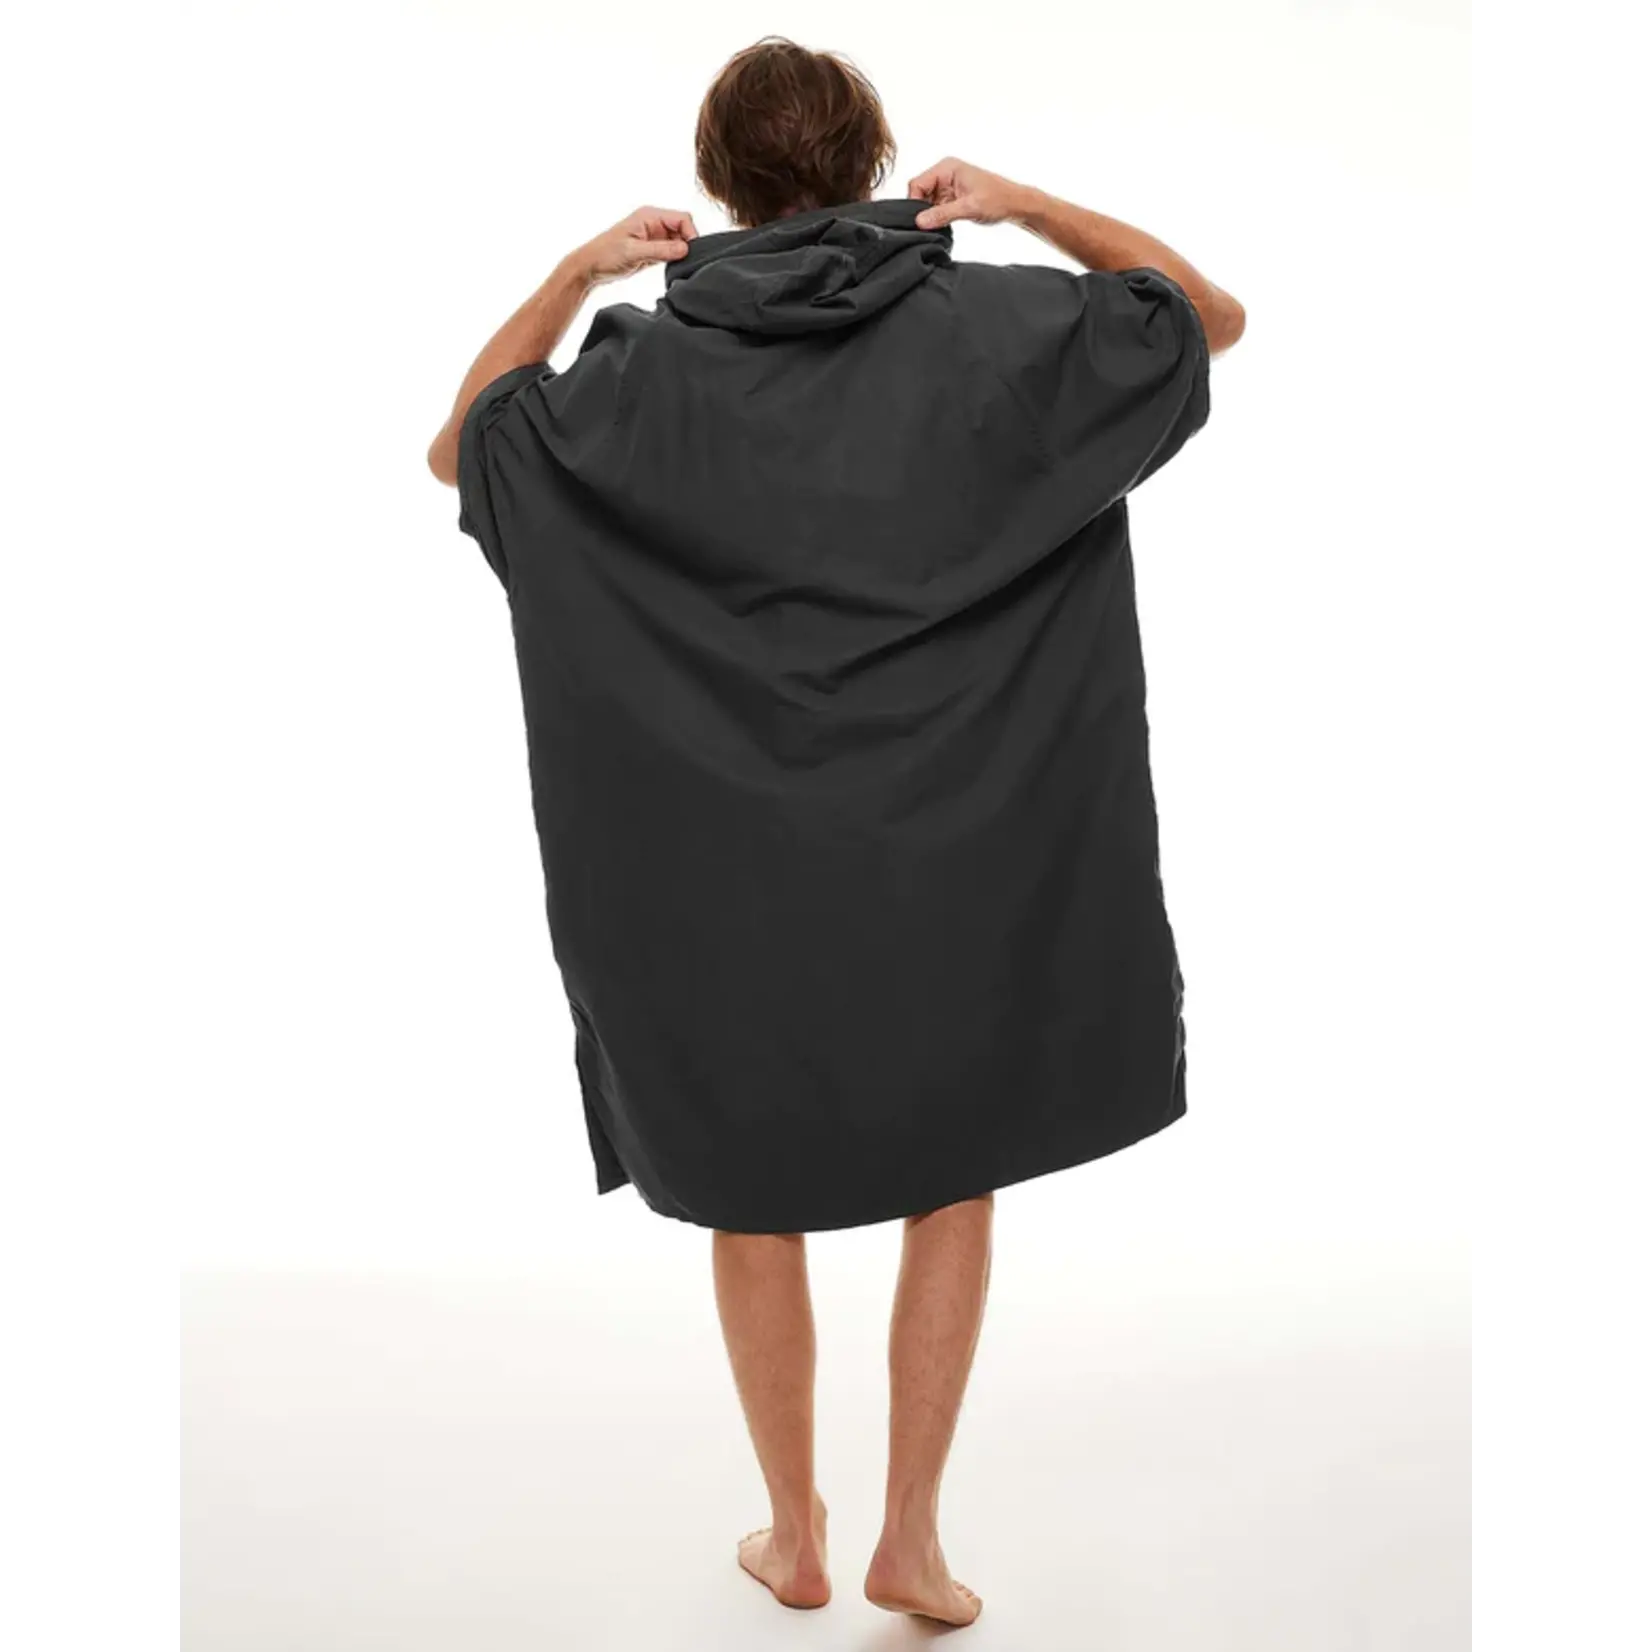 Red PaddleCo Quick Dry Change Robe